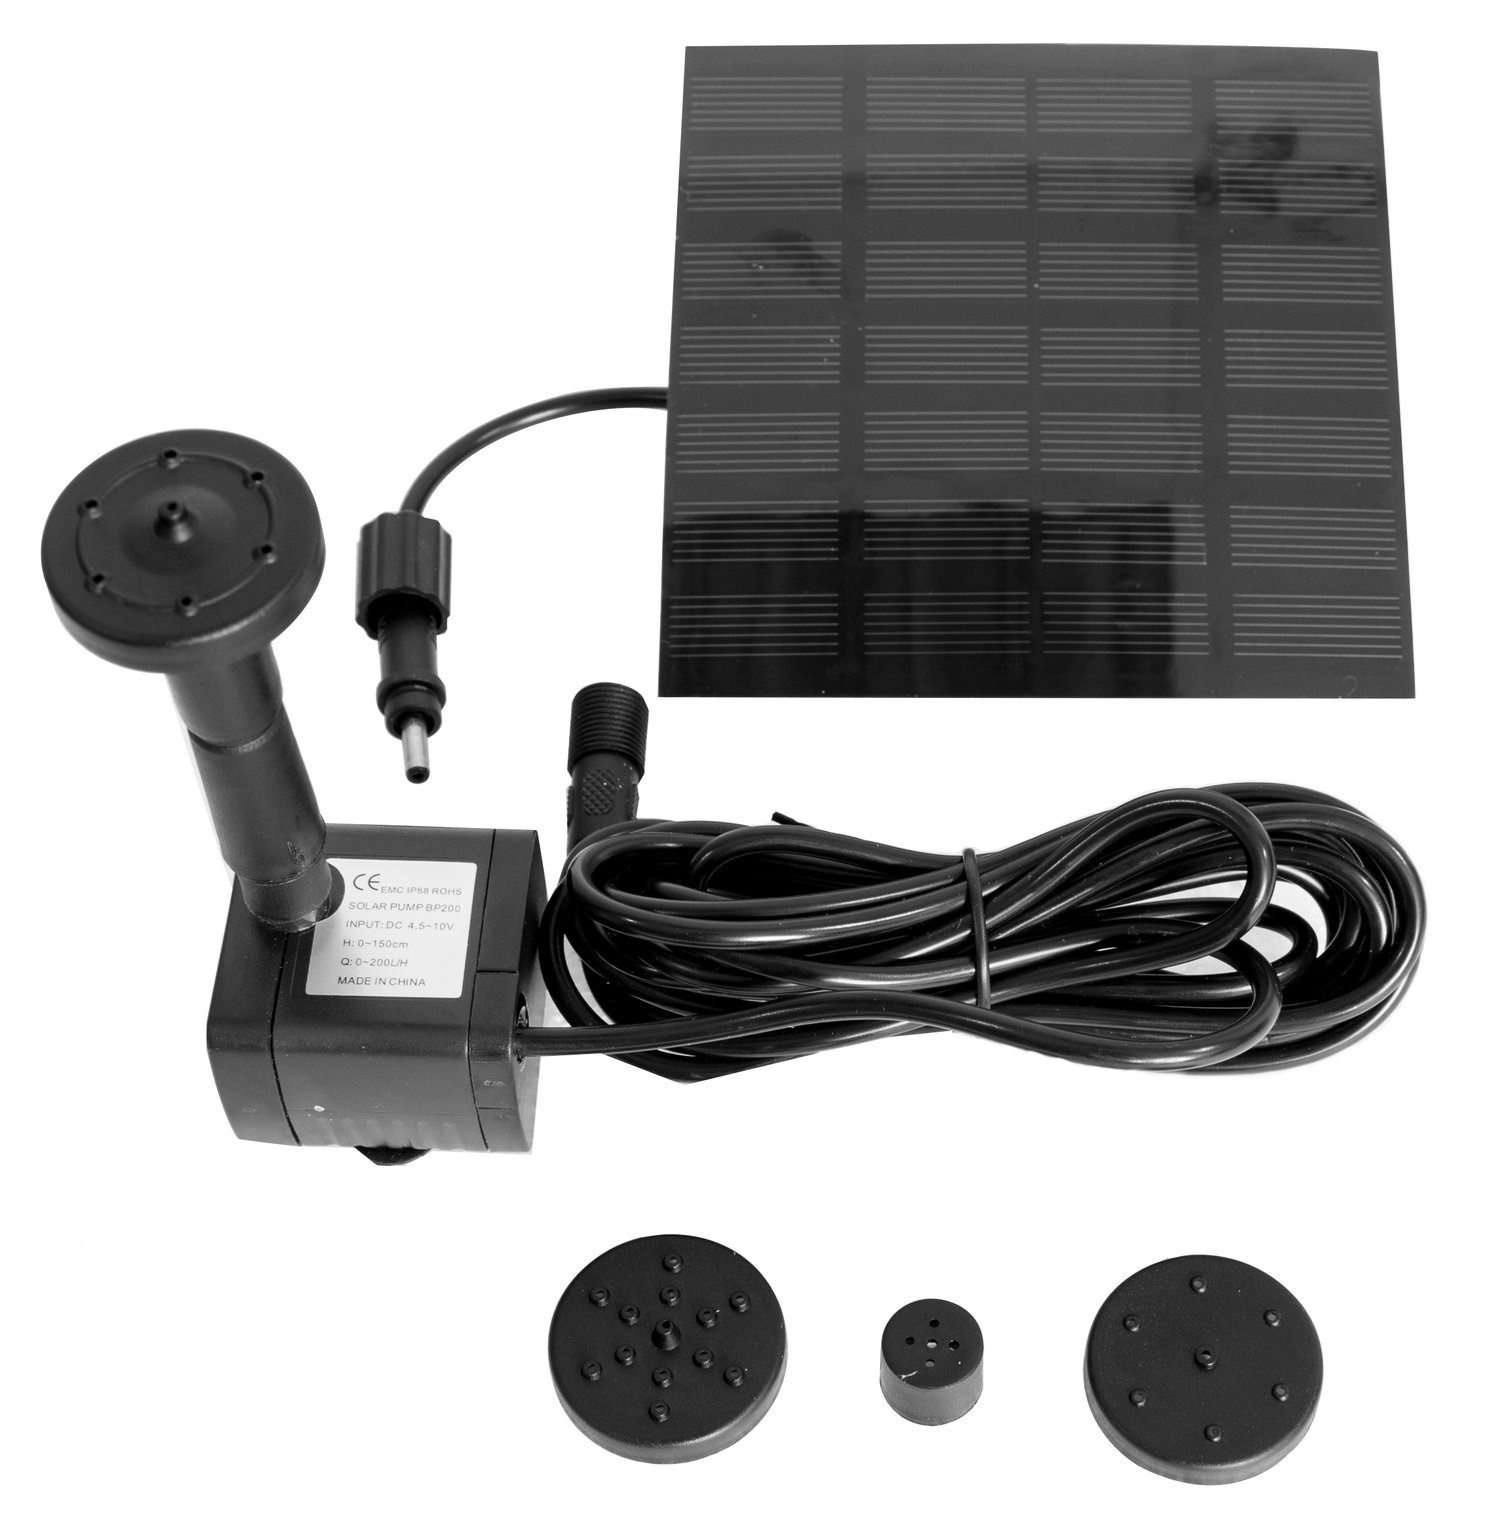 150LPH Solar Water Pump Kit with 4 Fountain Heads by Solaray